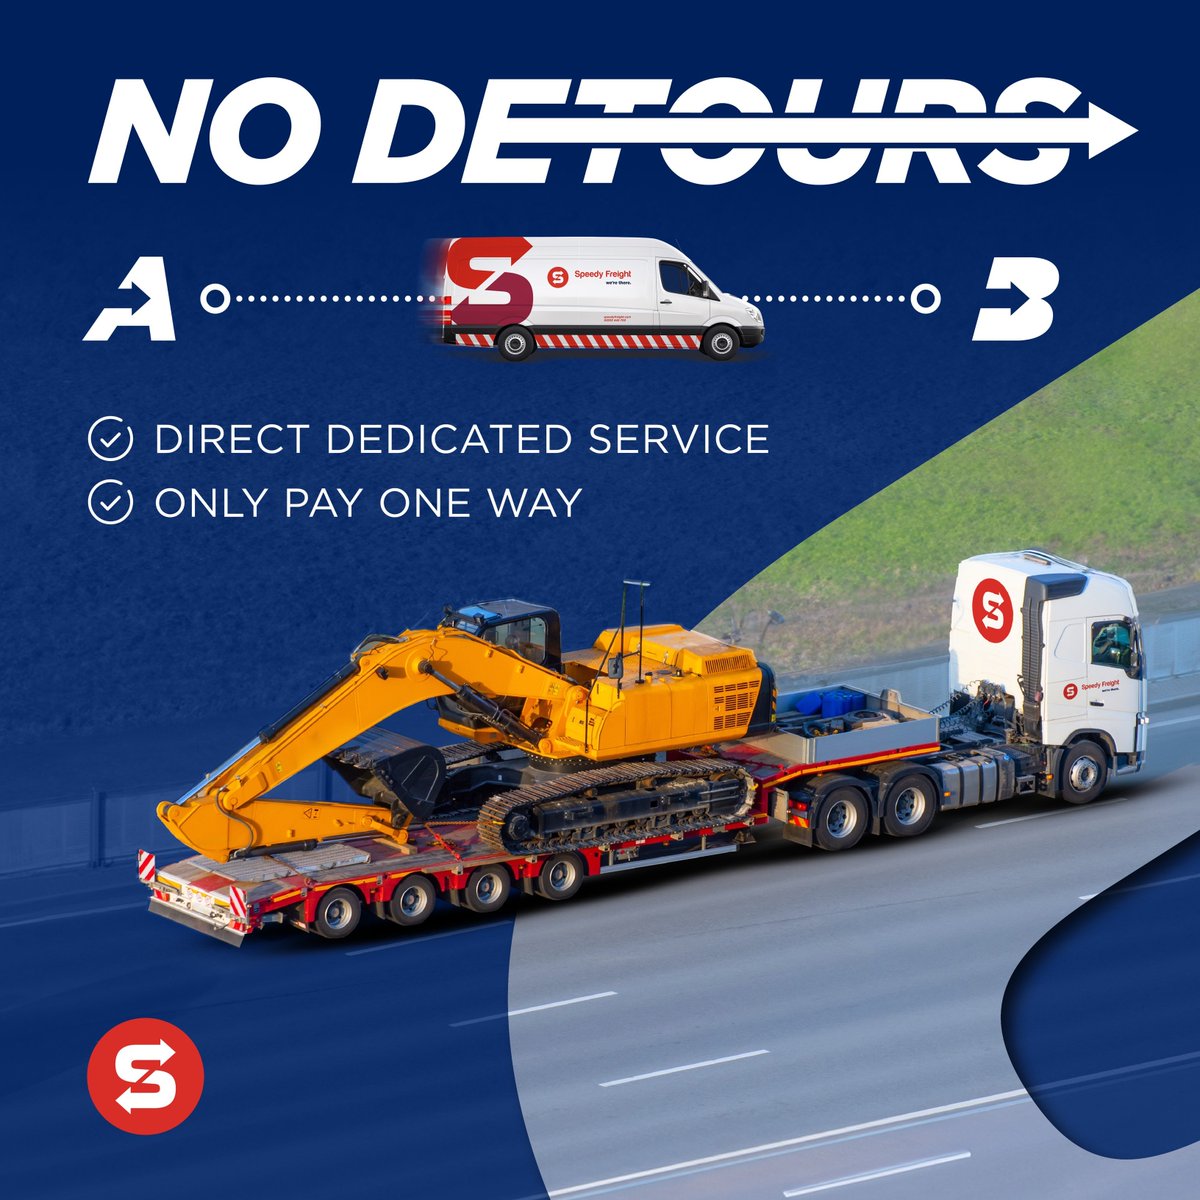 Every moment counts, that’s why we’re here to deliver what you need, when you need it—24/7, 365 days a year. Our dedicated delivery services ensure dedicated transport from A to B, with no detours. ➡️ Speak with your local Speedy Freight team: hubs.la/Q02trj9s0